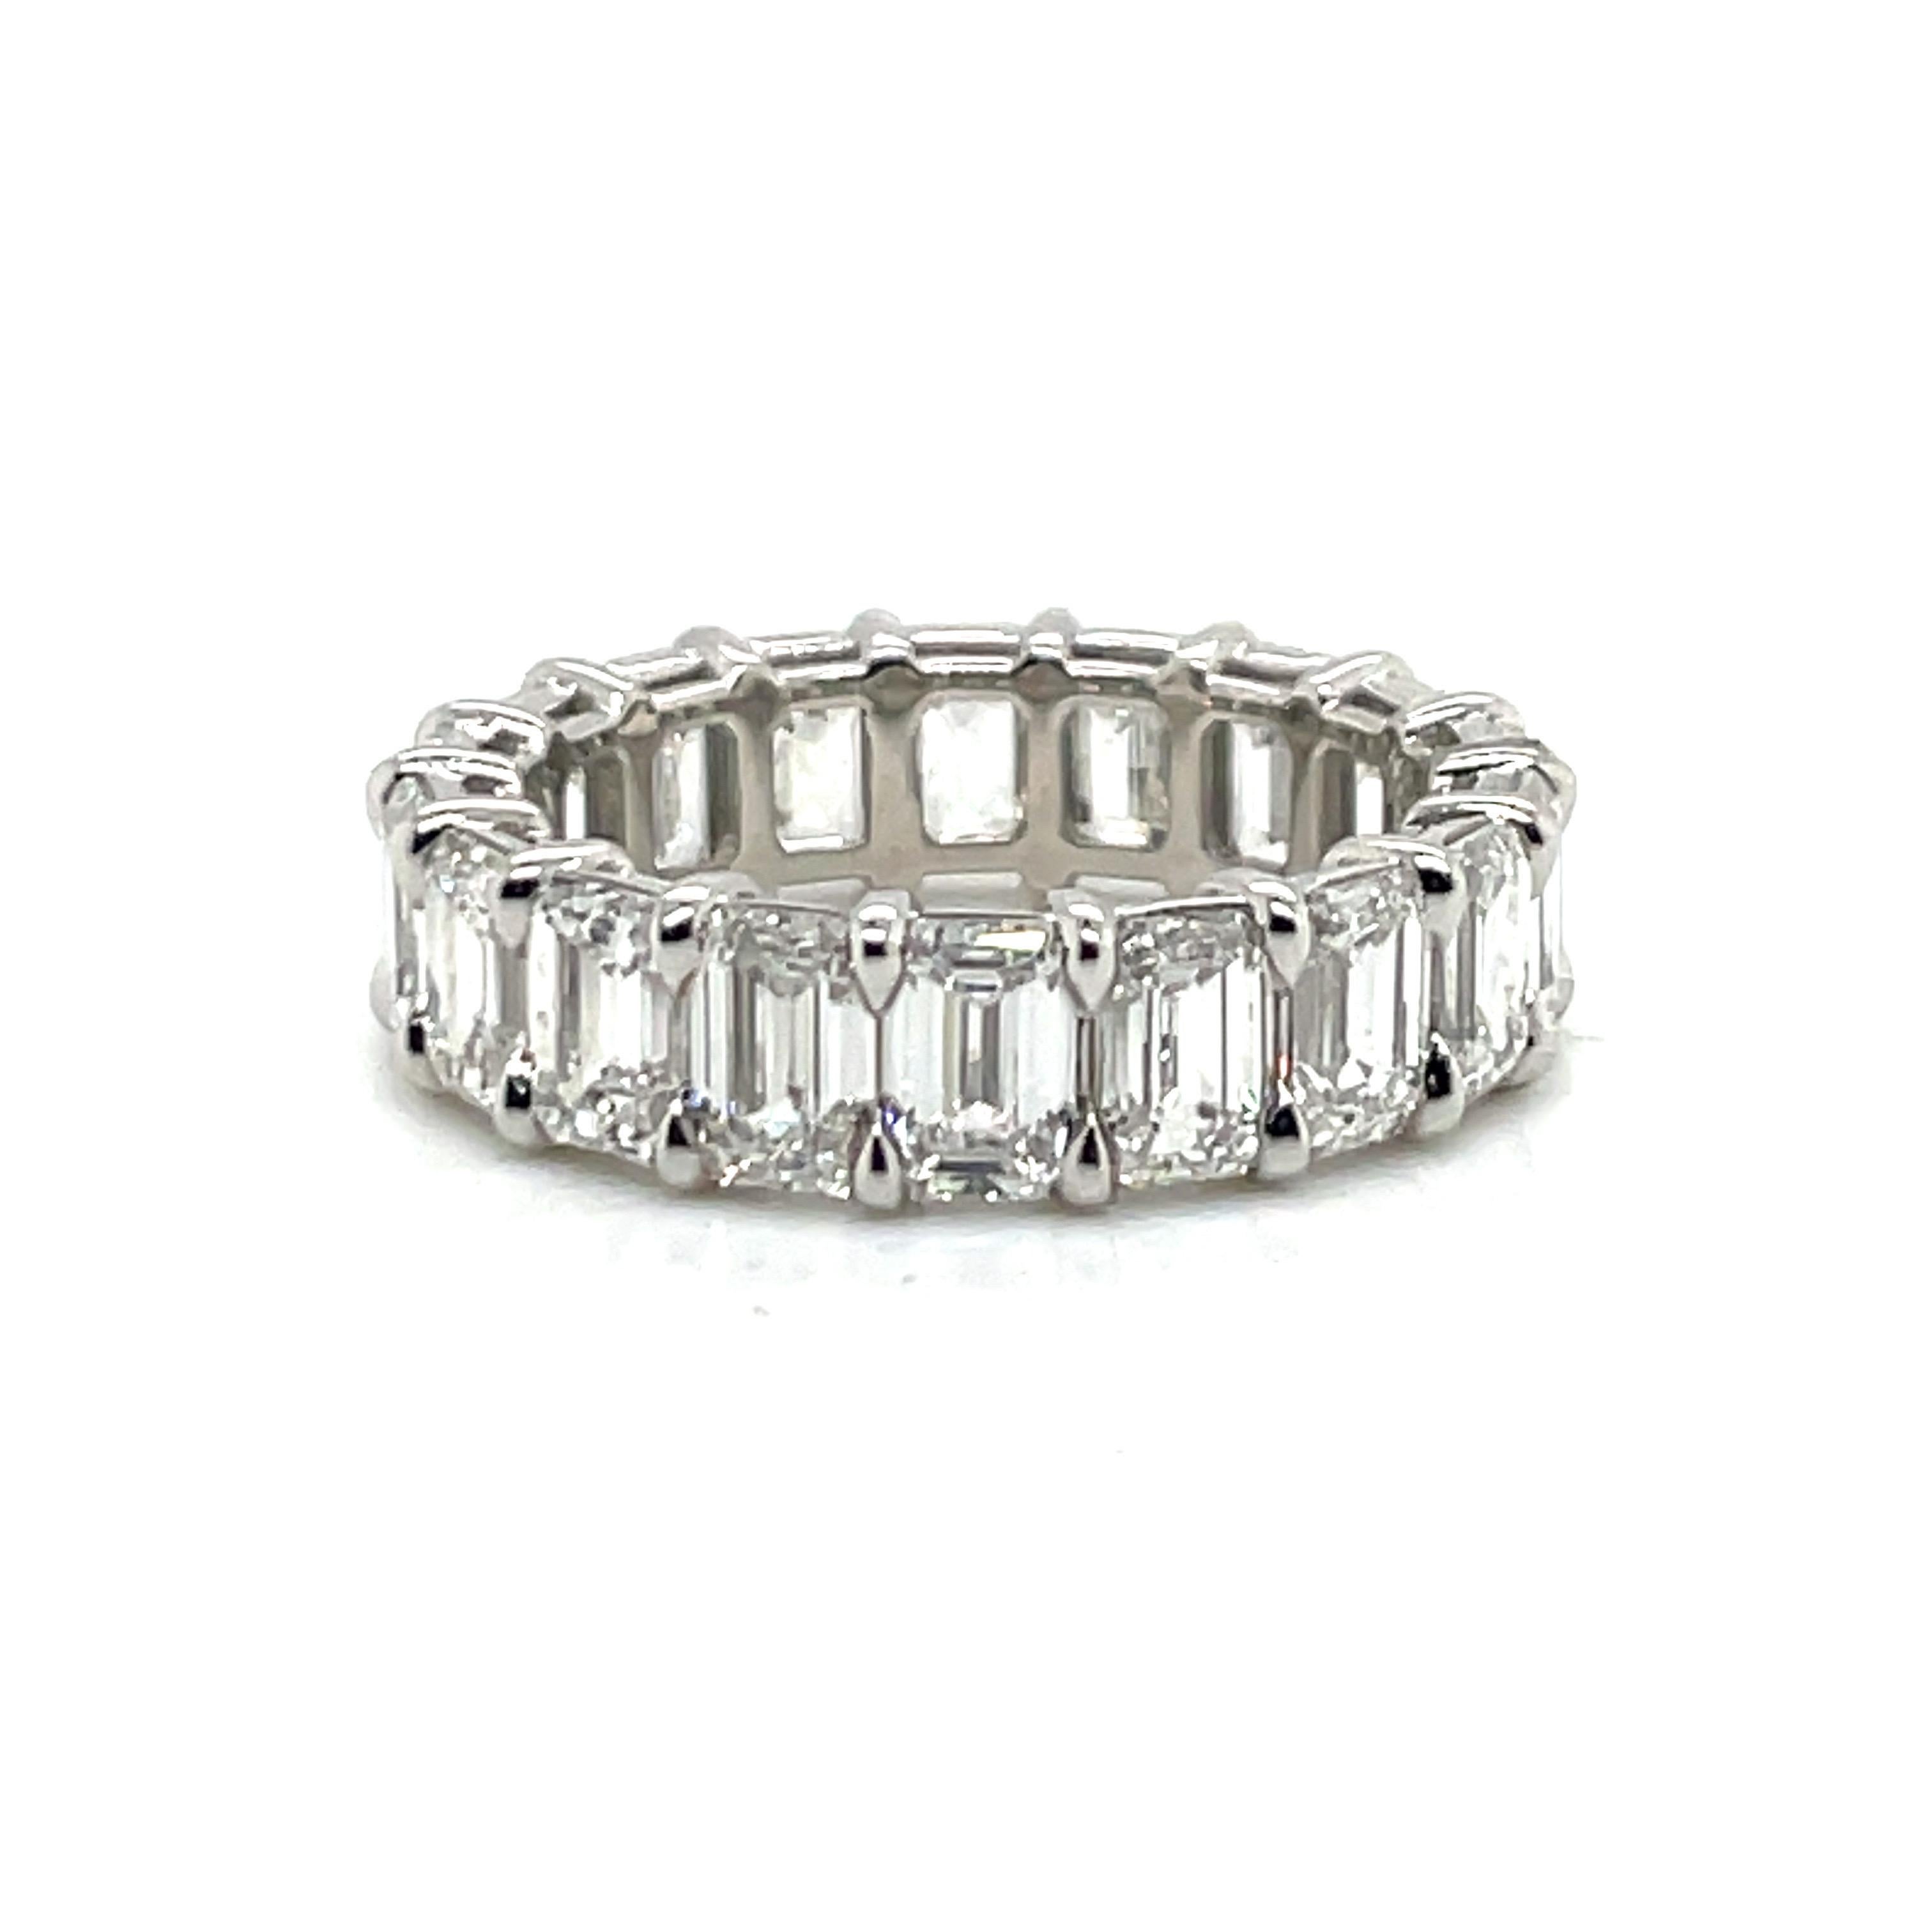 Emerald Cut wedding band featuring 18 diamonds weighing a total of 7.41 Carats. Average diamonds are 0.40 points each, crafted in Platinum. 
Color F-G
Clarity VVS-VS2

We have a nice selection on Emerald, Oval & different shape wedding bands. All